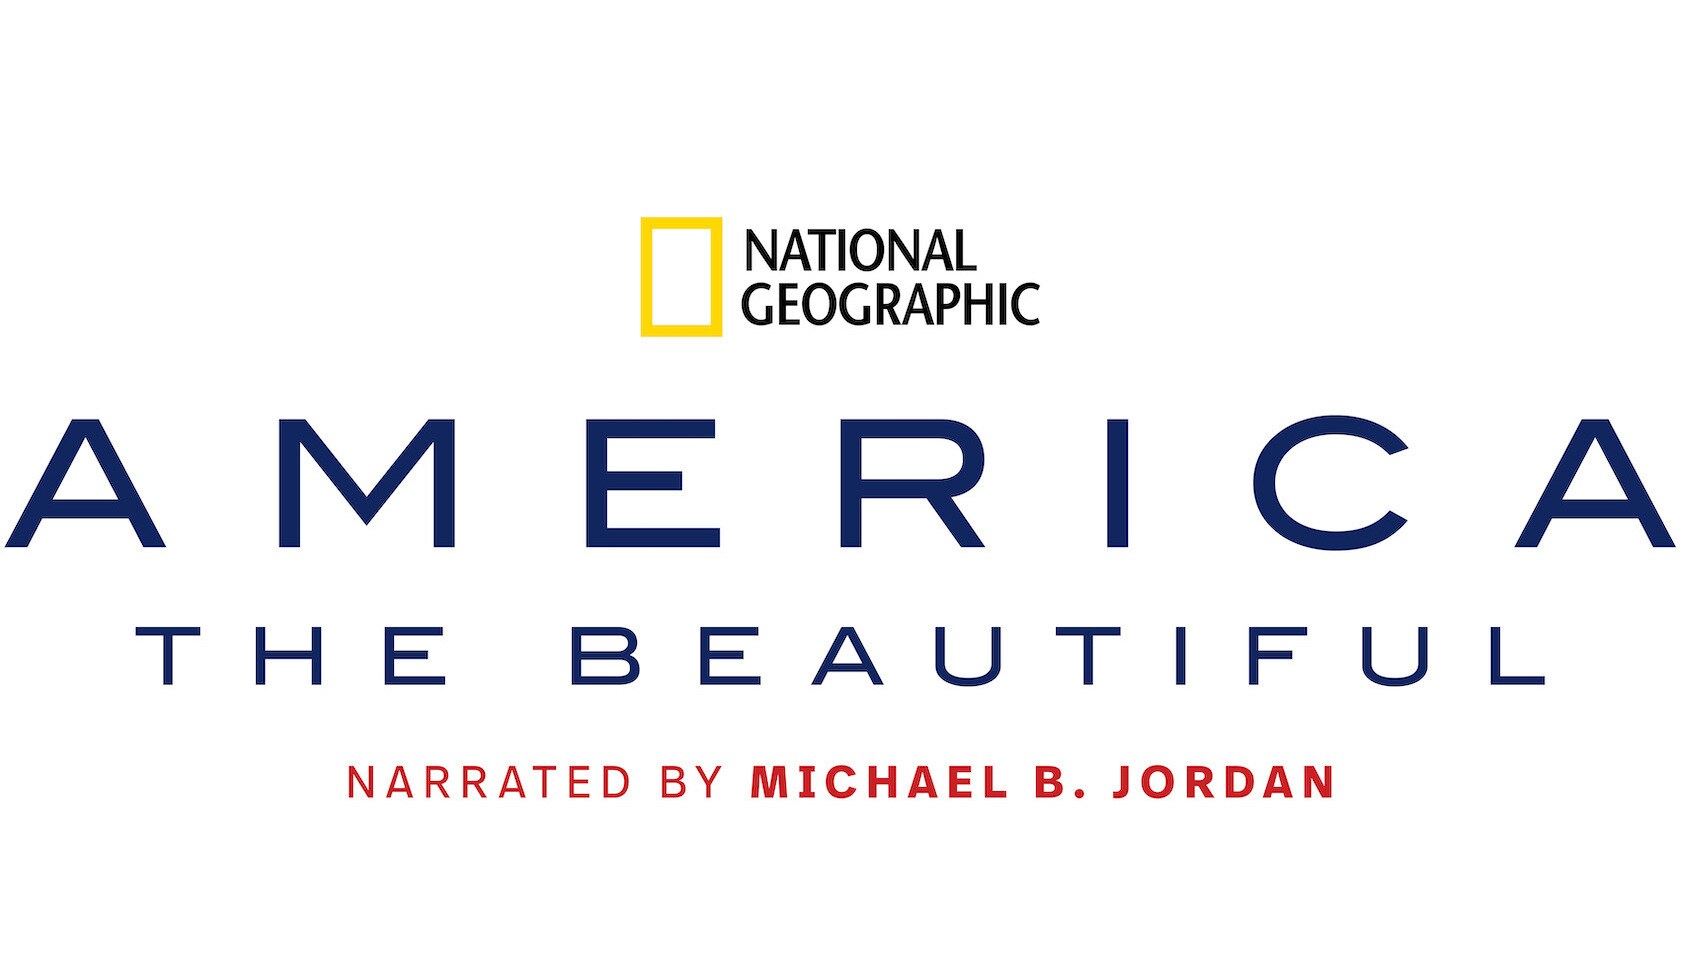 DISNEY+ CELEBRATES THE WONDER AND DIVERSITY OF NORTH AMERICA’S PICTURESQUE LANDSCAPES AND AMAZING ANIMALS IN THE TRAILER OF   ‘AMERICA THE BEAUTIFUL’ FROM NATIONAL GEOGRAPHIC 